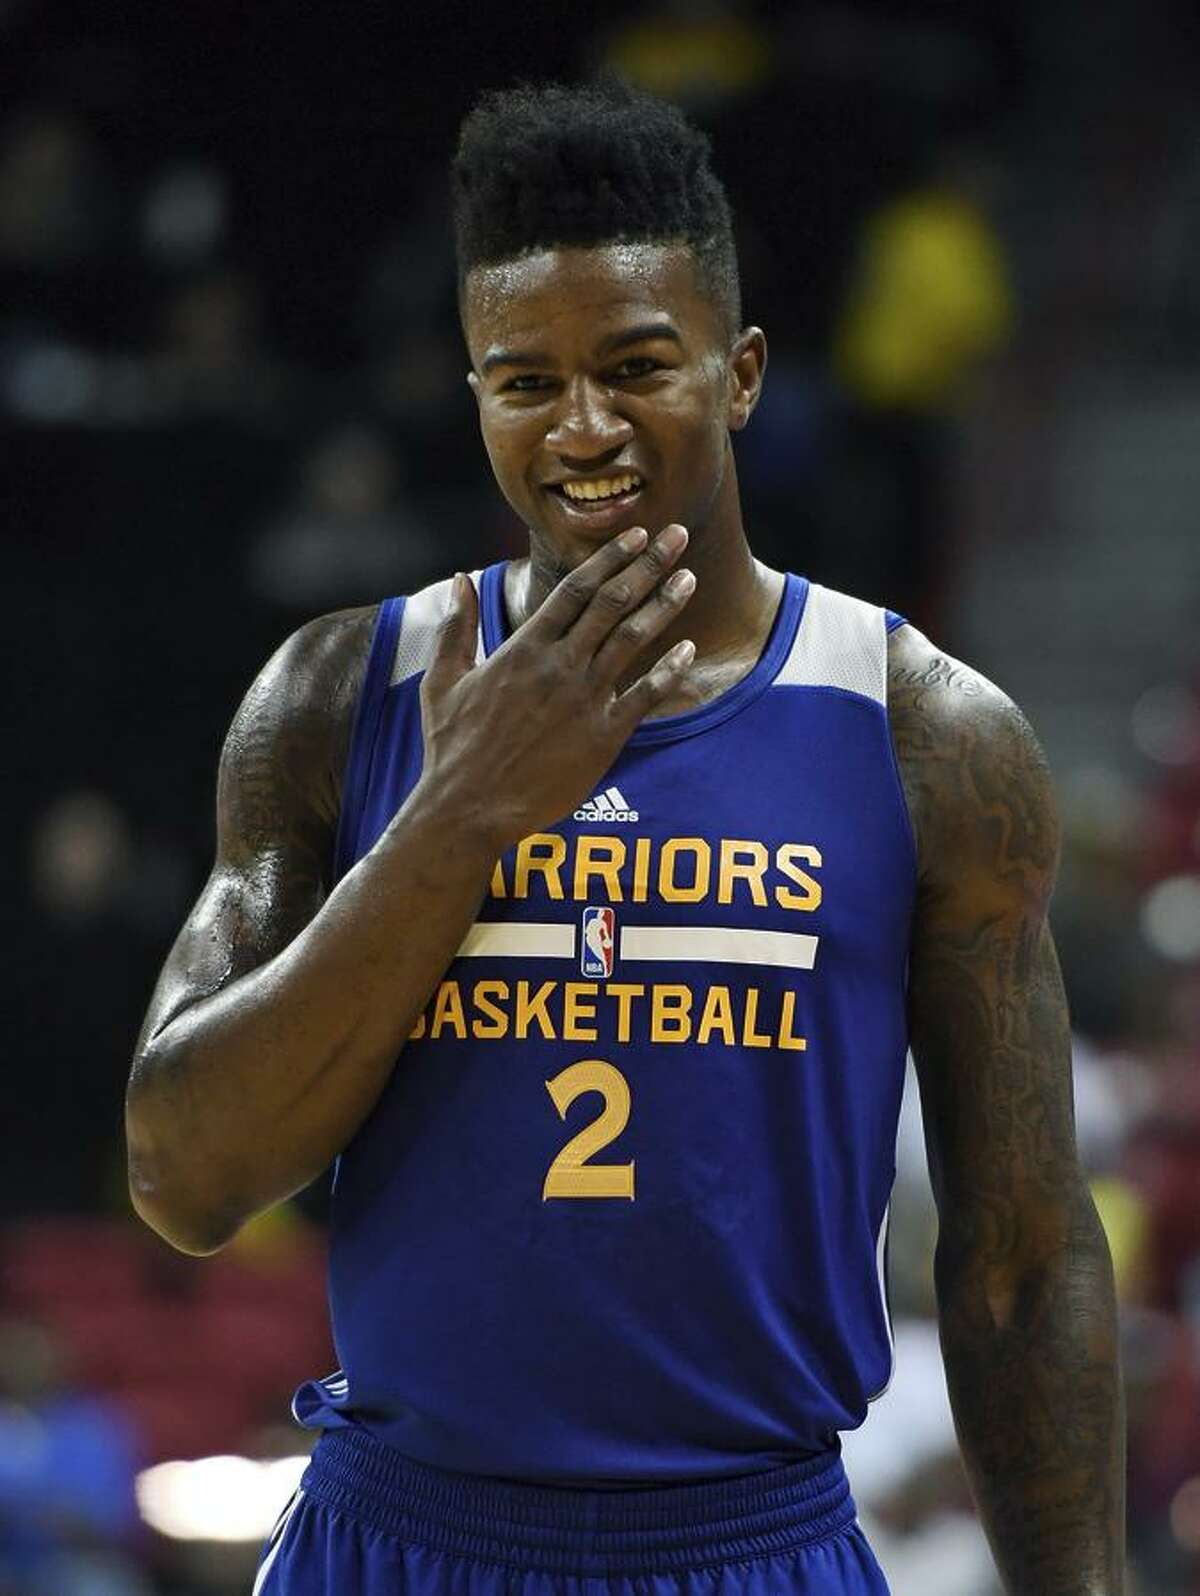 LAS VEGAS, NV - JULY 12: Jordan Bell #2 of the Golden State Warriors smiles on the court during a 2017 Summer League game against the Minnesota Timberwolves at the Thomas & Mack Center on July 12, 2017 in Las Vegas, Nevada. Golden State won 77-69. NOTE TO USER: User expressly acknowledges and agrees that, by downloading and or using this photograph, User is consenting to the terms and conditions of the Getty Images License Agreement. (Photo by Ethan Miller/Getty Images)